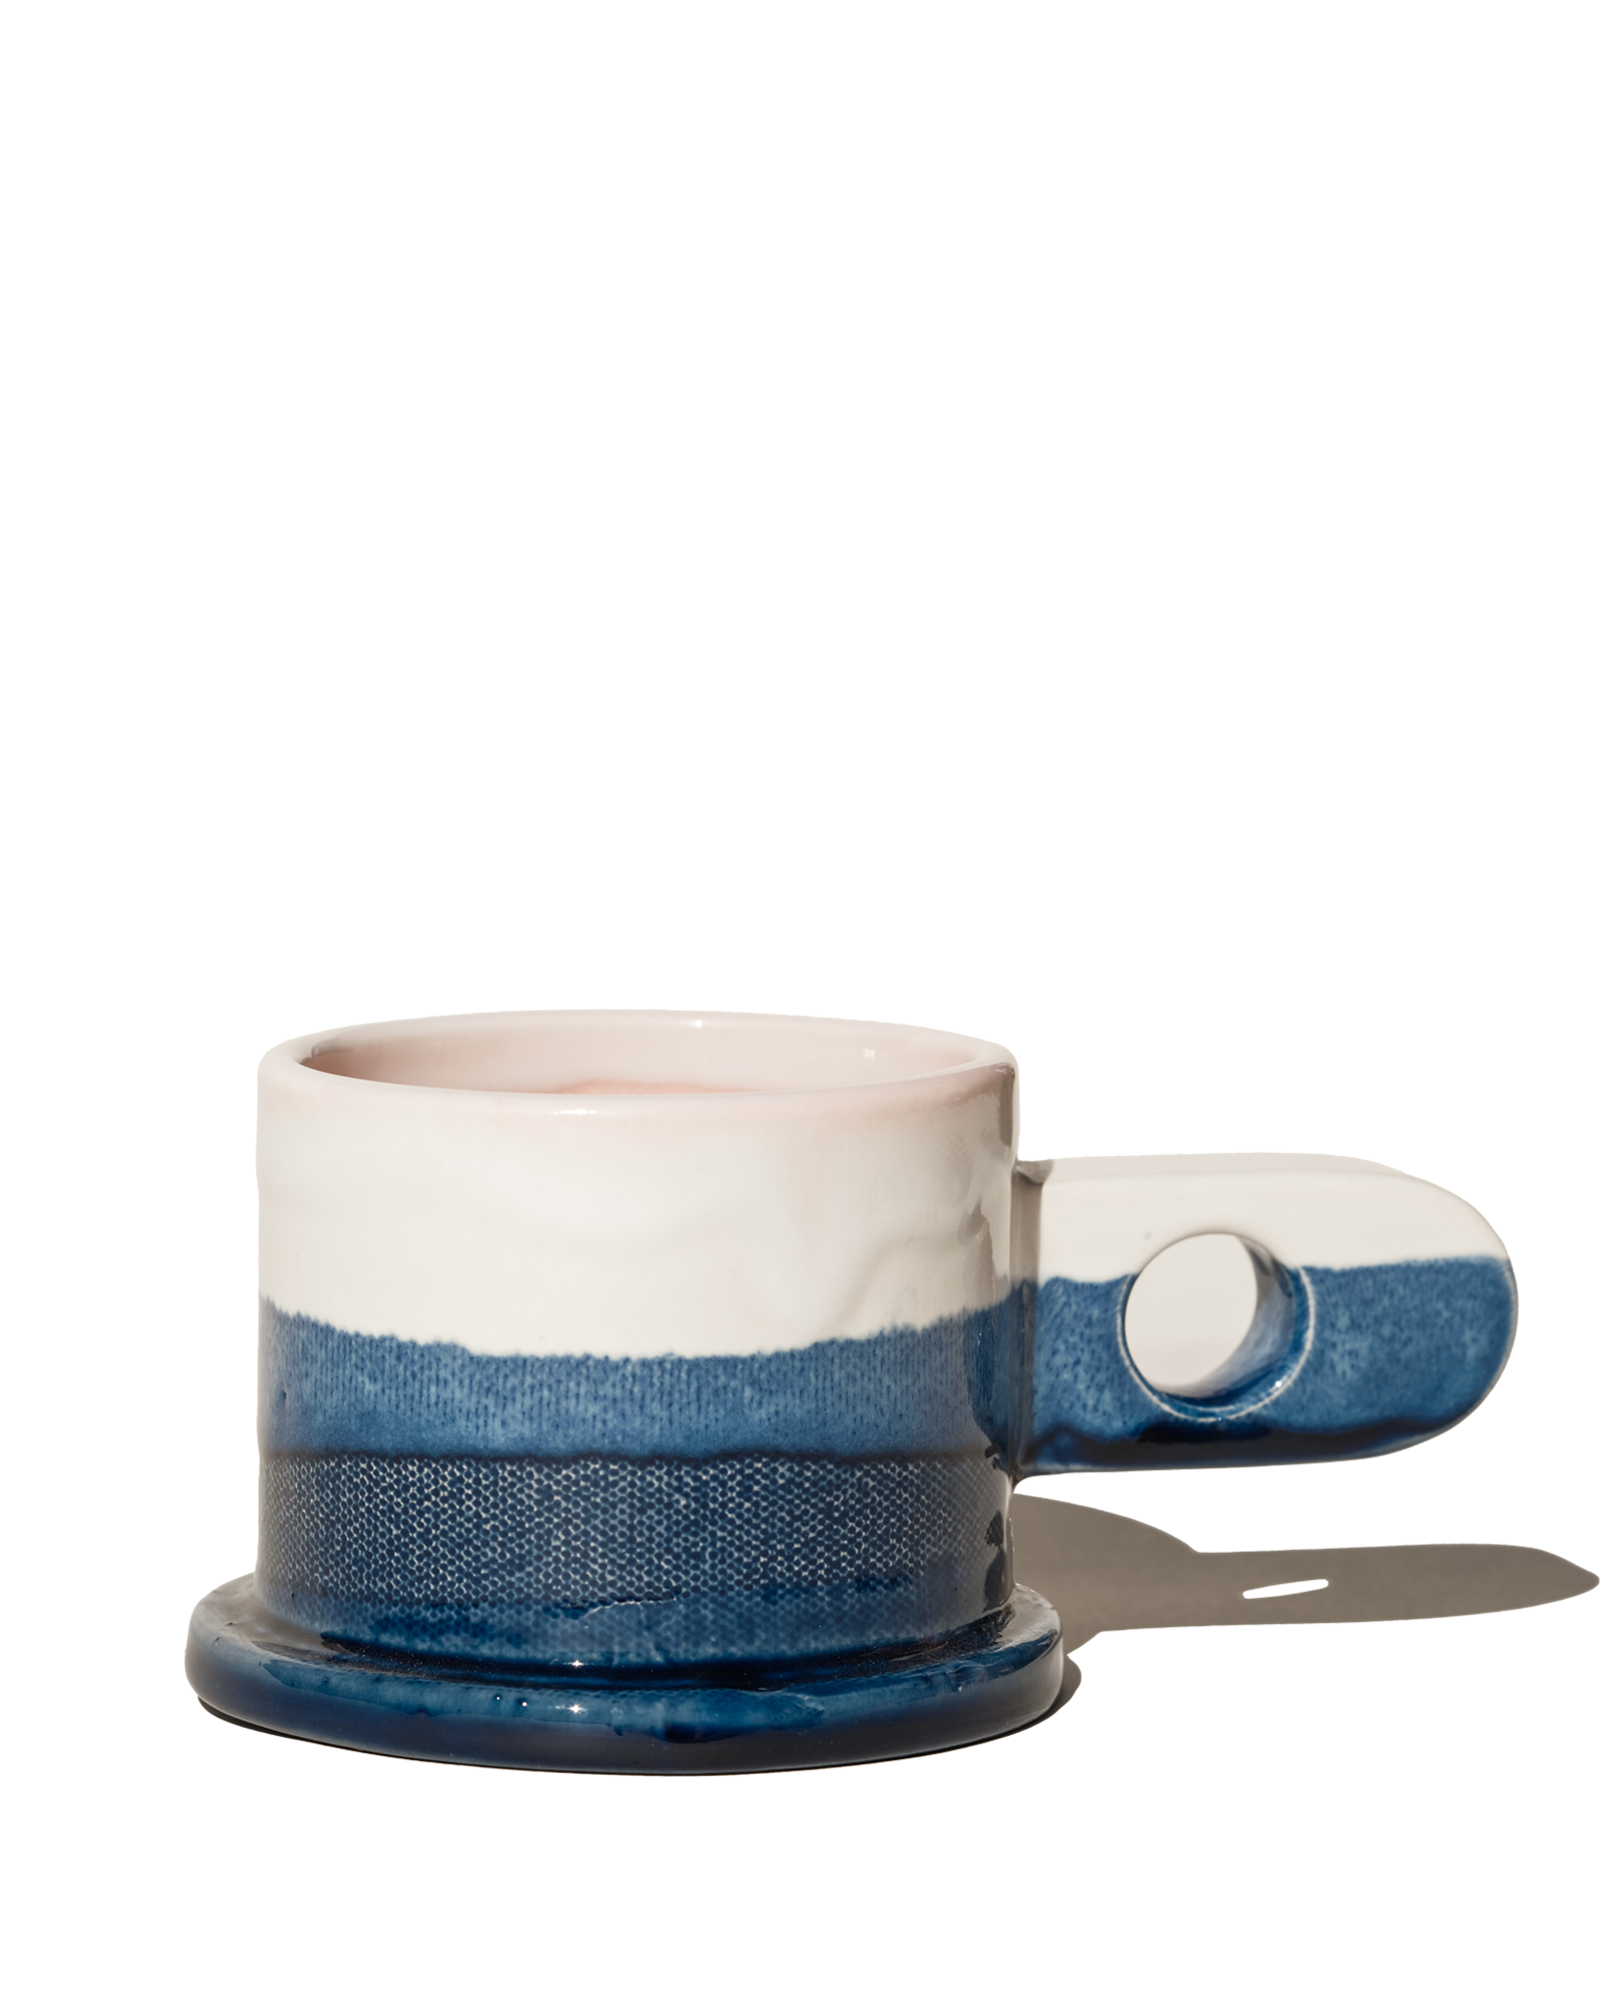 Double Dip Espresso Cup in Navy by Peter Shire